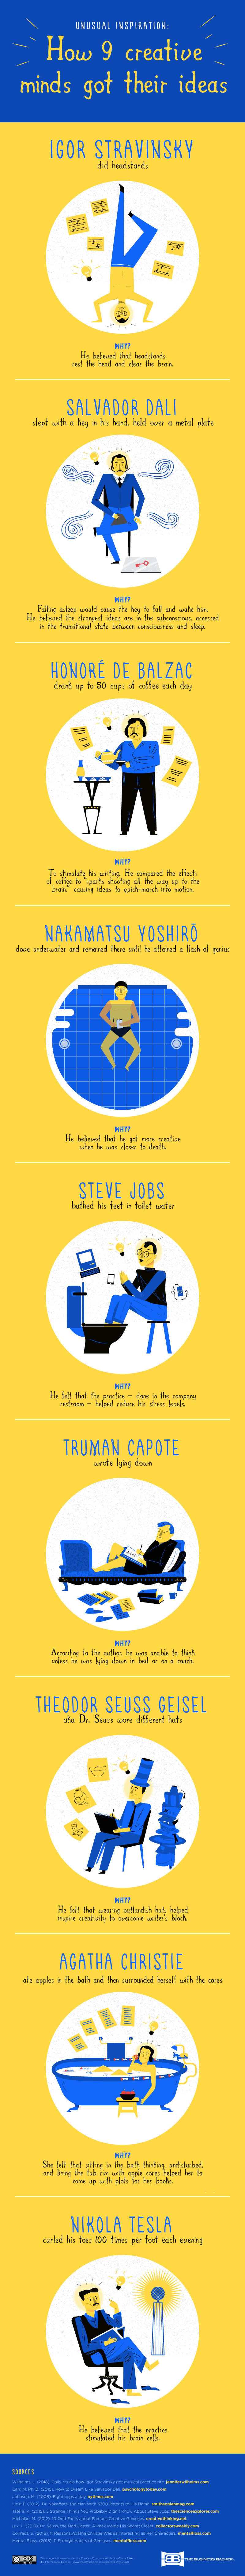 Infographic Unusual inspiration how creative minds got their ideas